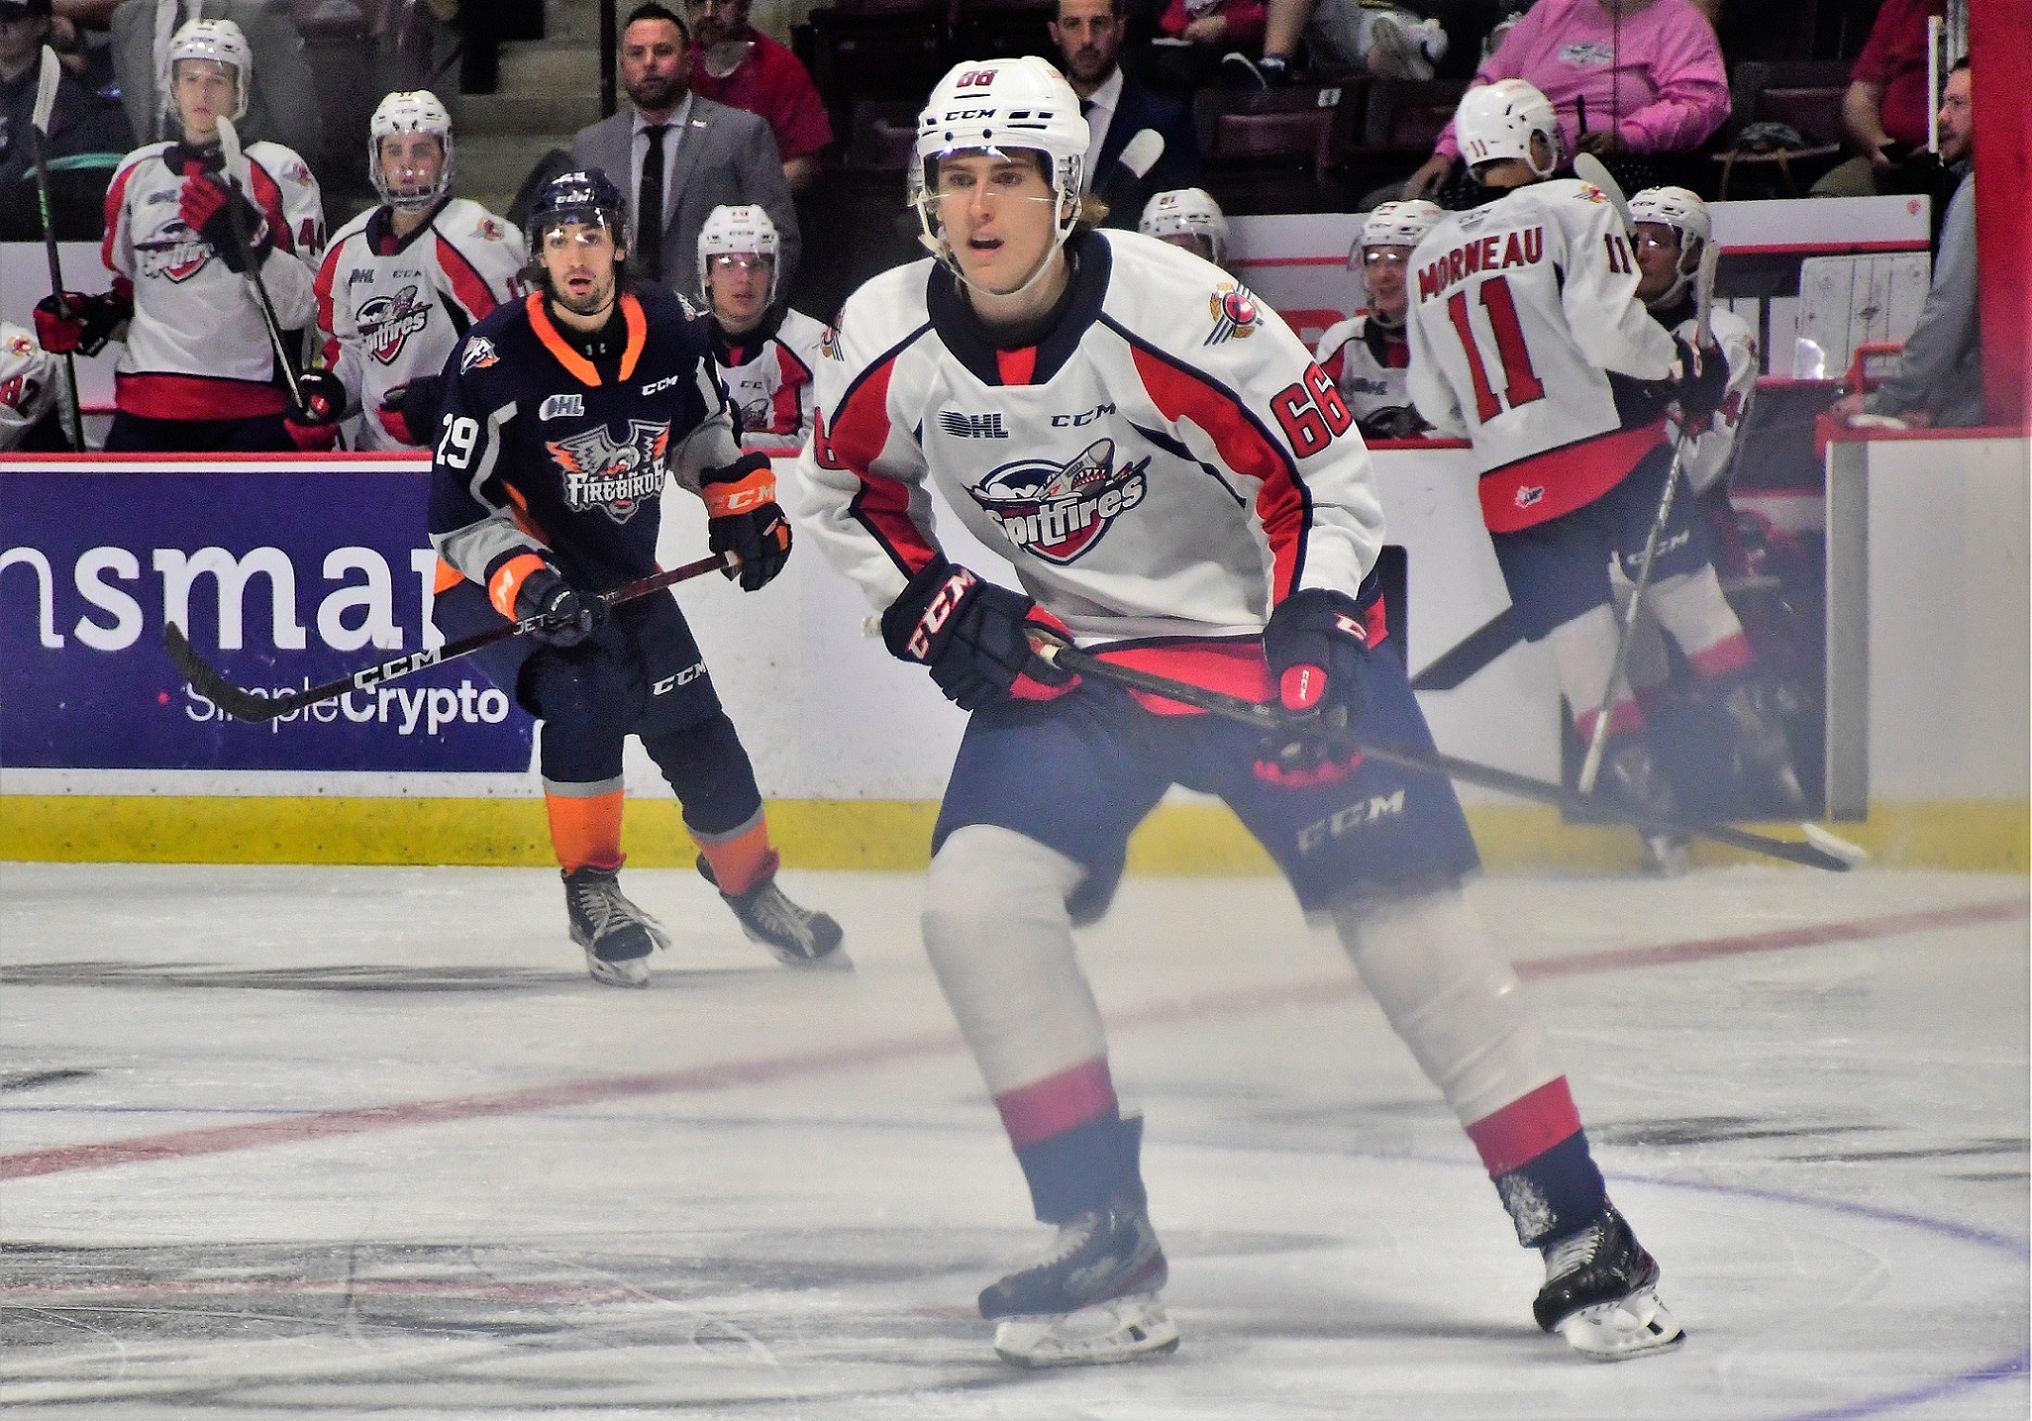 Potential Breakout Stars The Windsor Spitfires Players to Watch in the Upcoming OHL Season